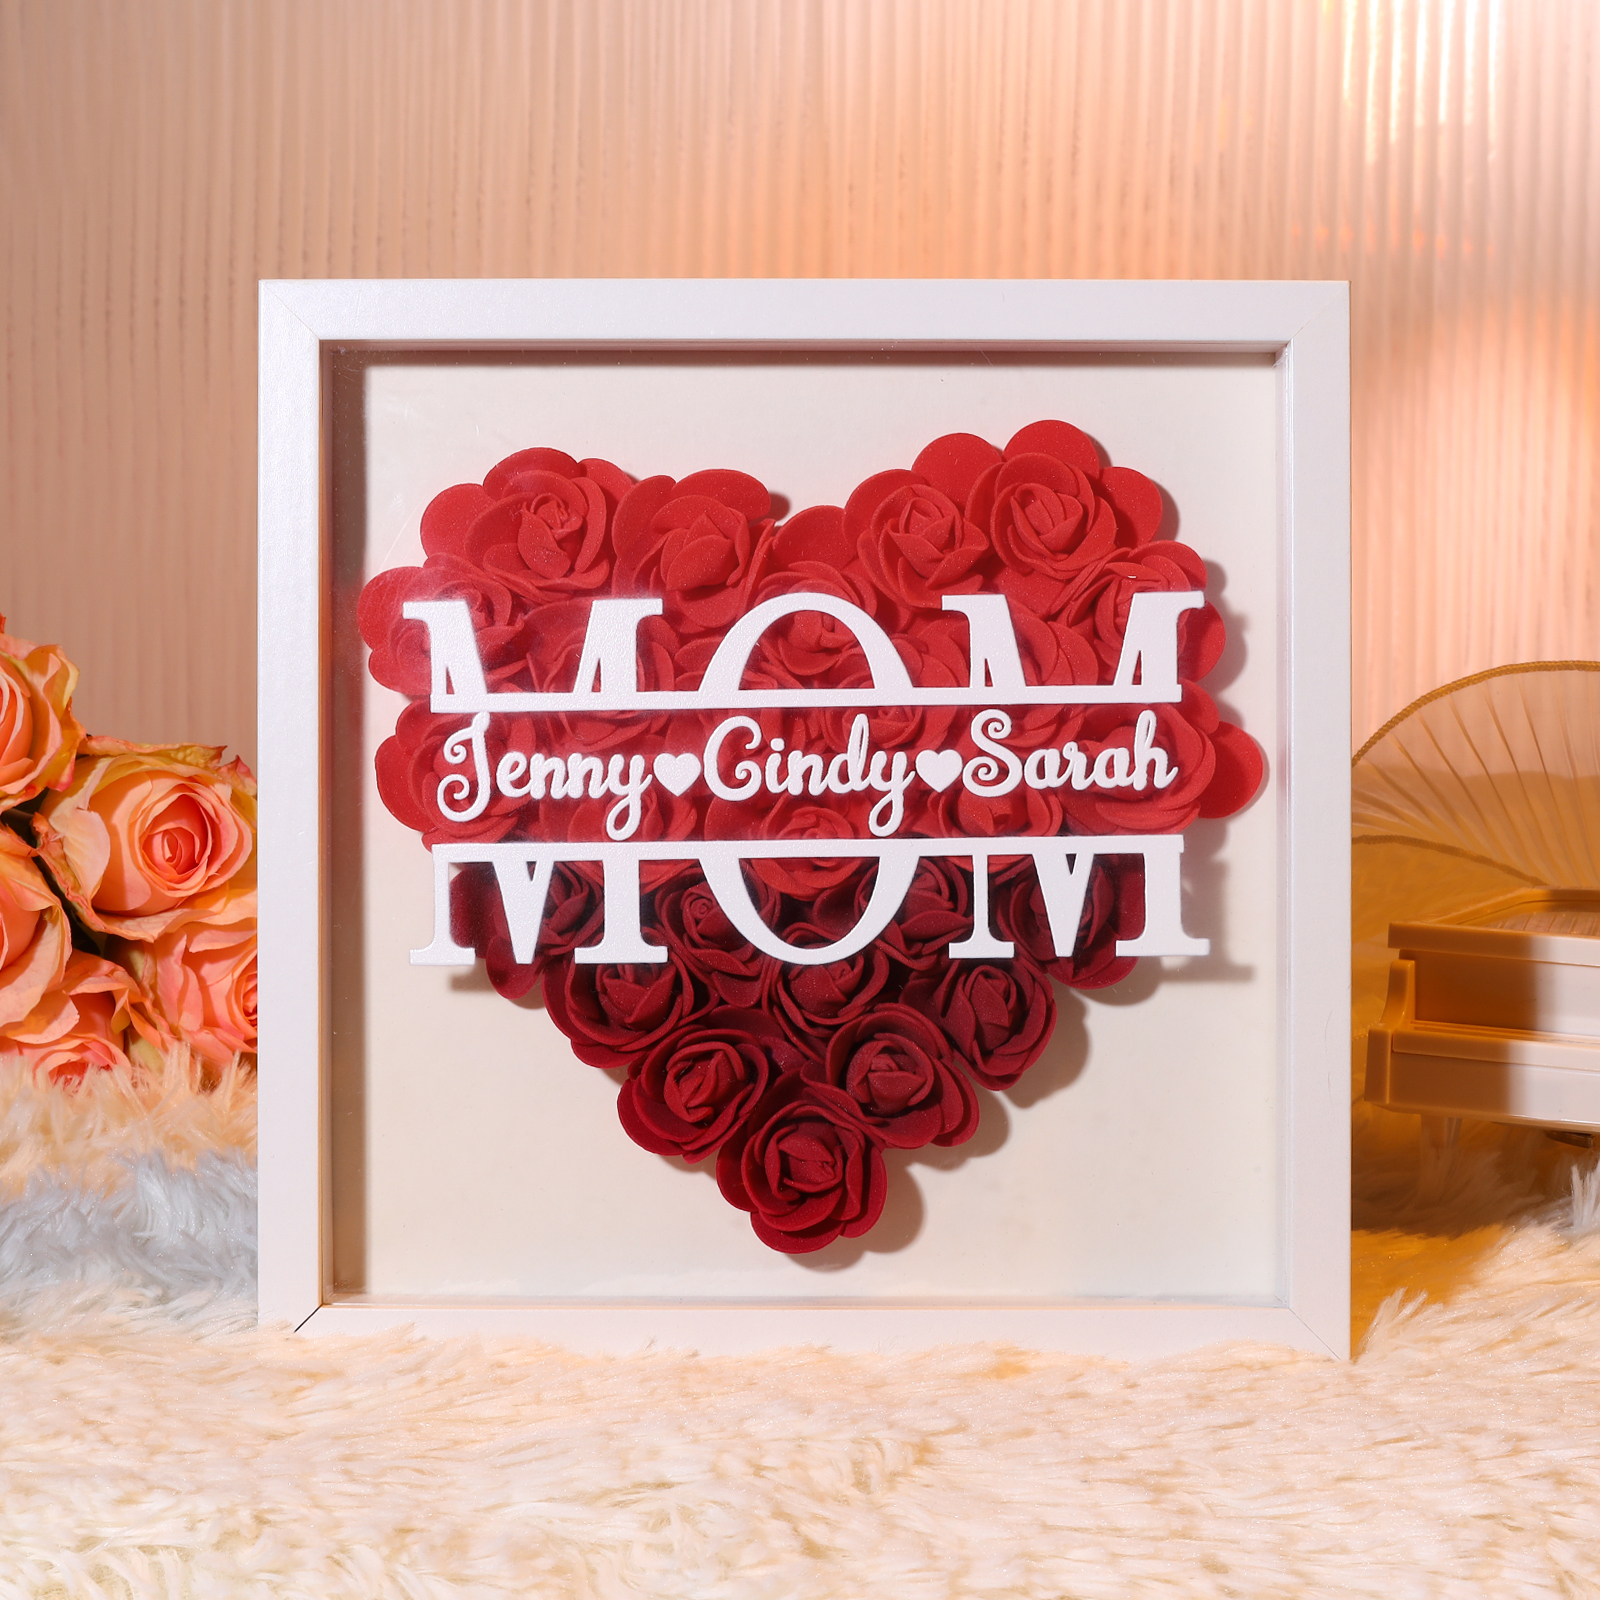 Personalized Custom Name and Text, Exquisite Love Decorations in Five 